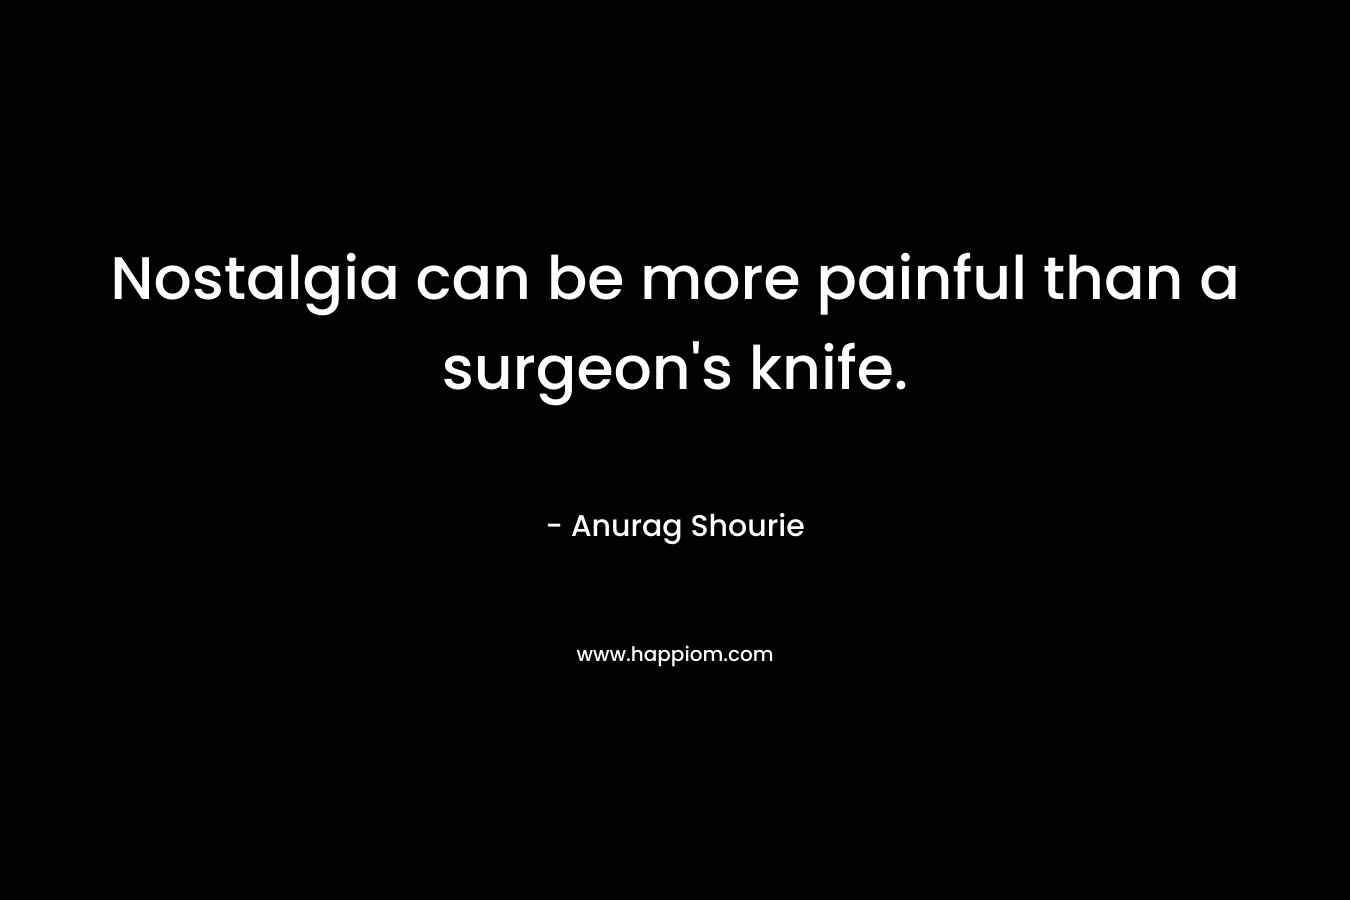 Nostalgia can be more painful than a surgeon’s knife. – Anurag Shourie